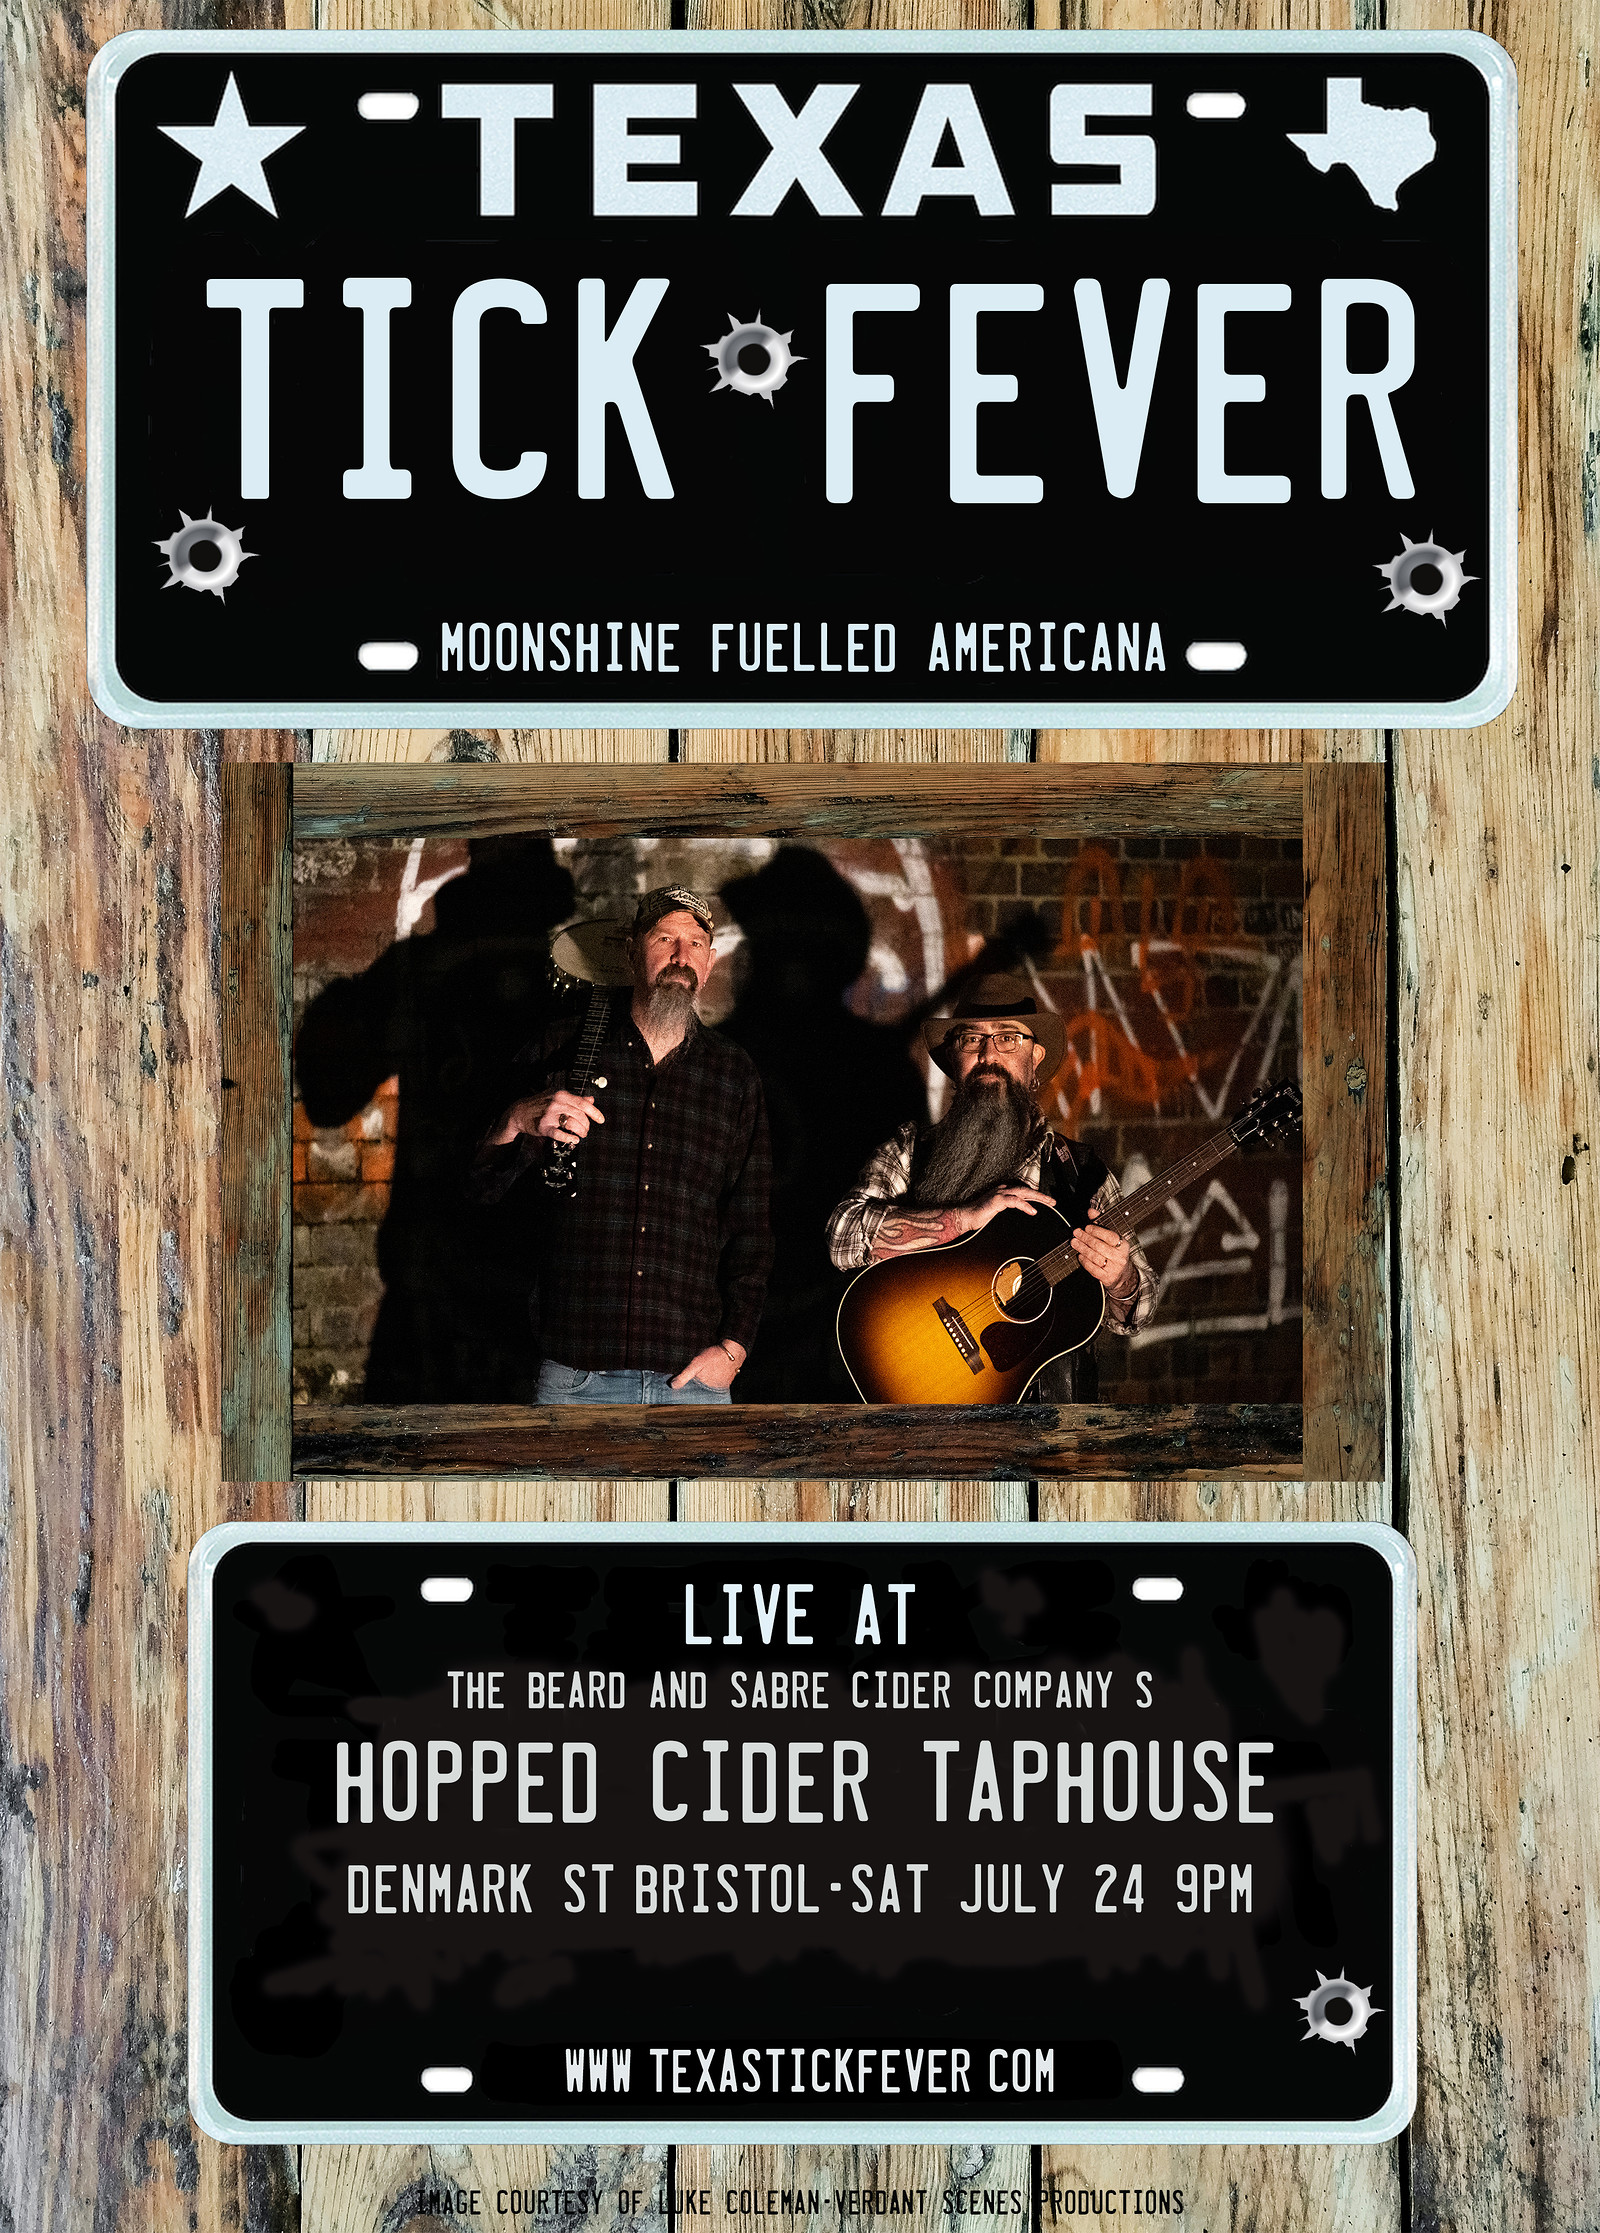 Texas Tick Fever @ The Hopped Ciderhouse at Beard and Sabre